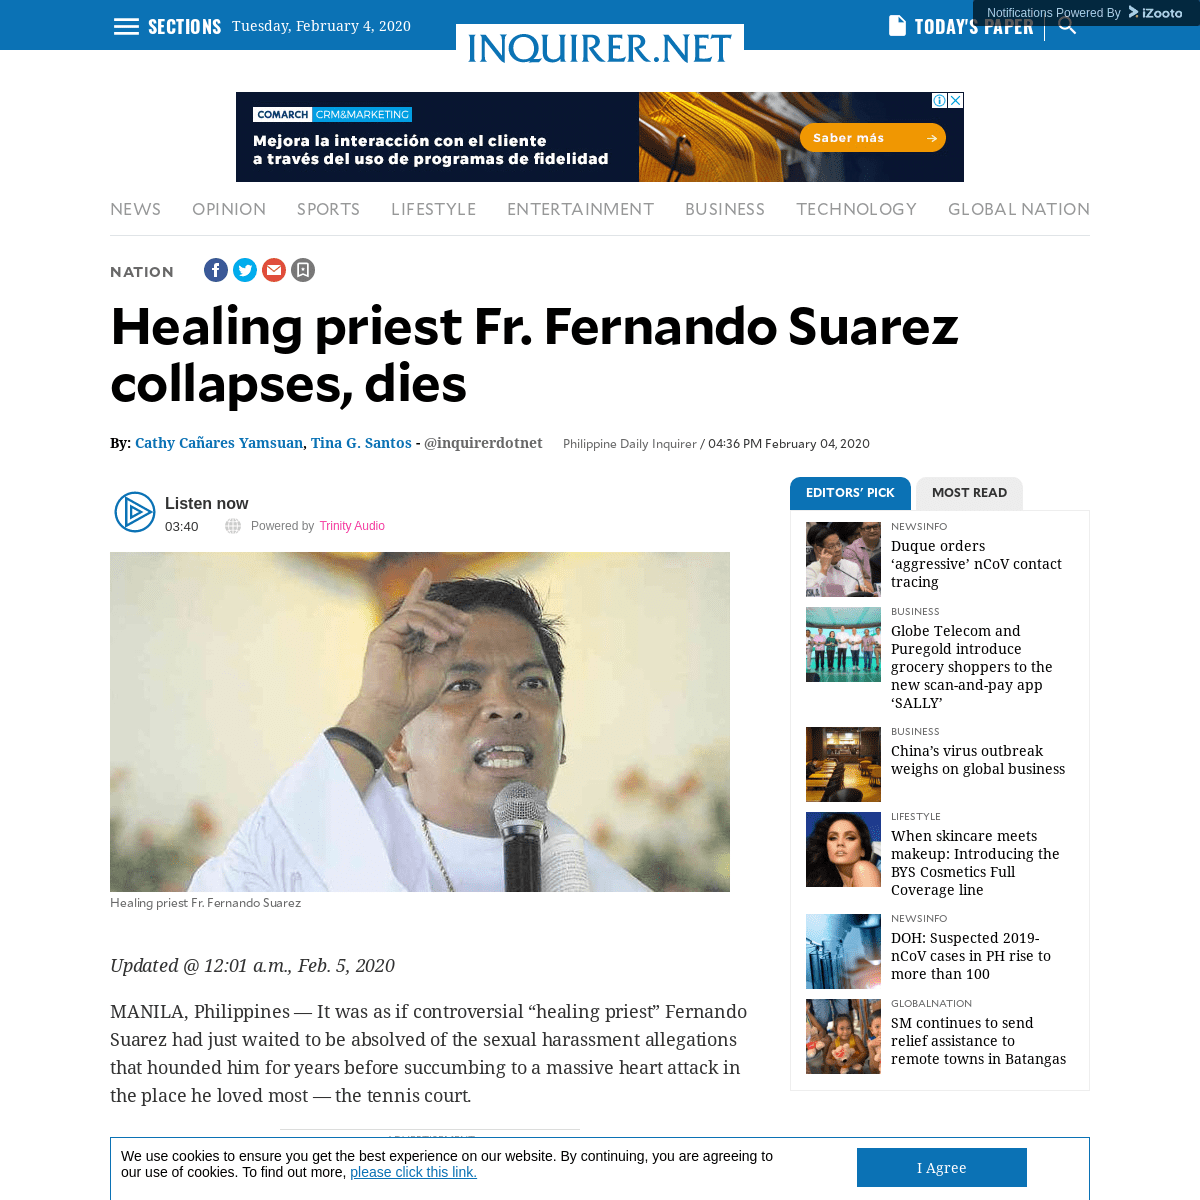 A complete backup of newsinfo.inquirer.net/1224035/healing-priest-fr-fernando-suarez-collapses-dies